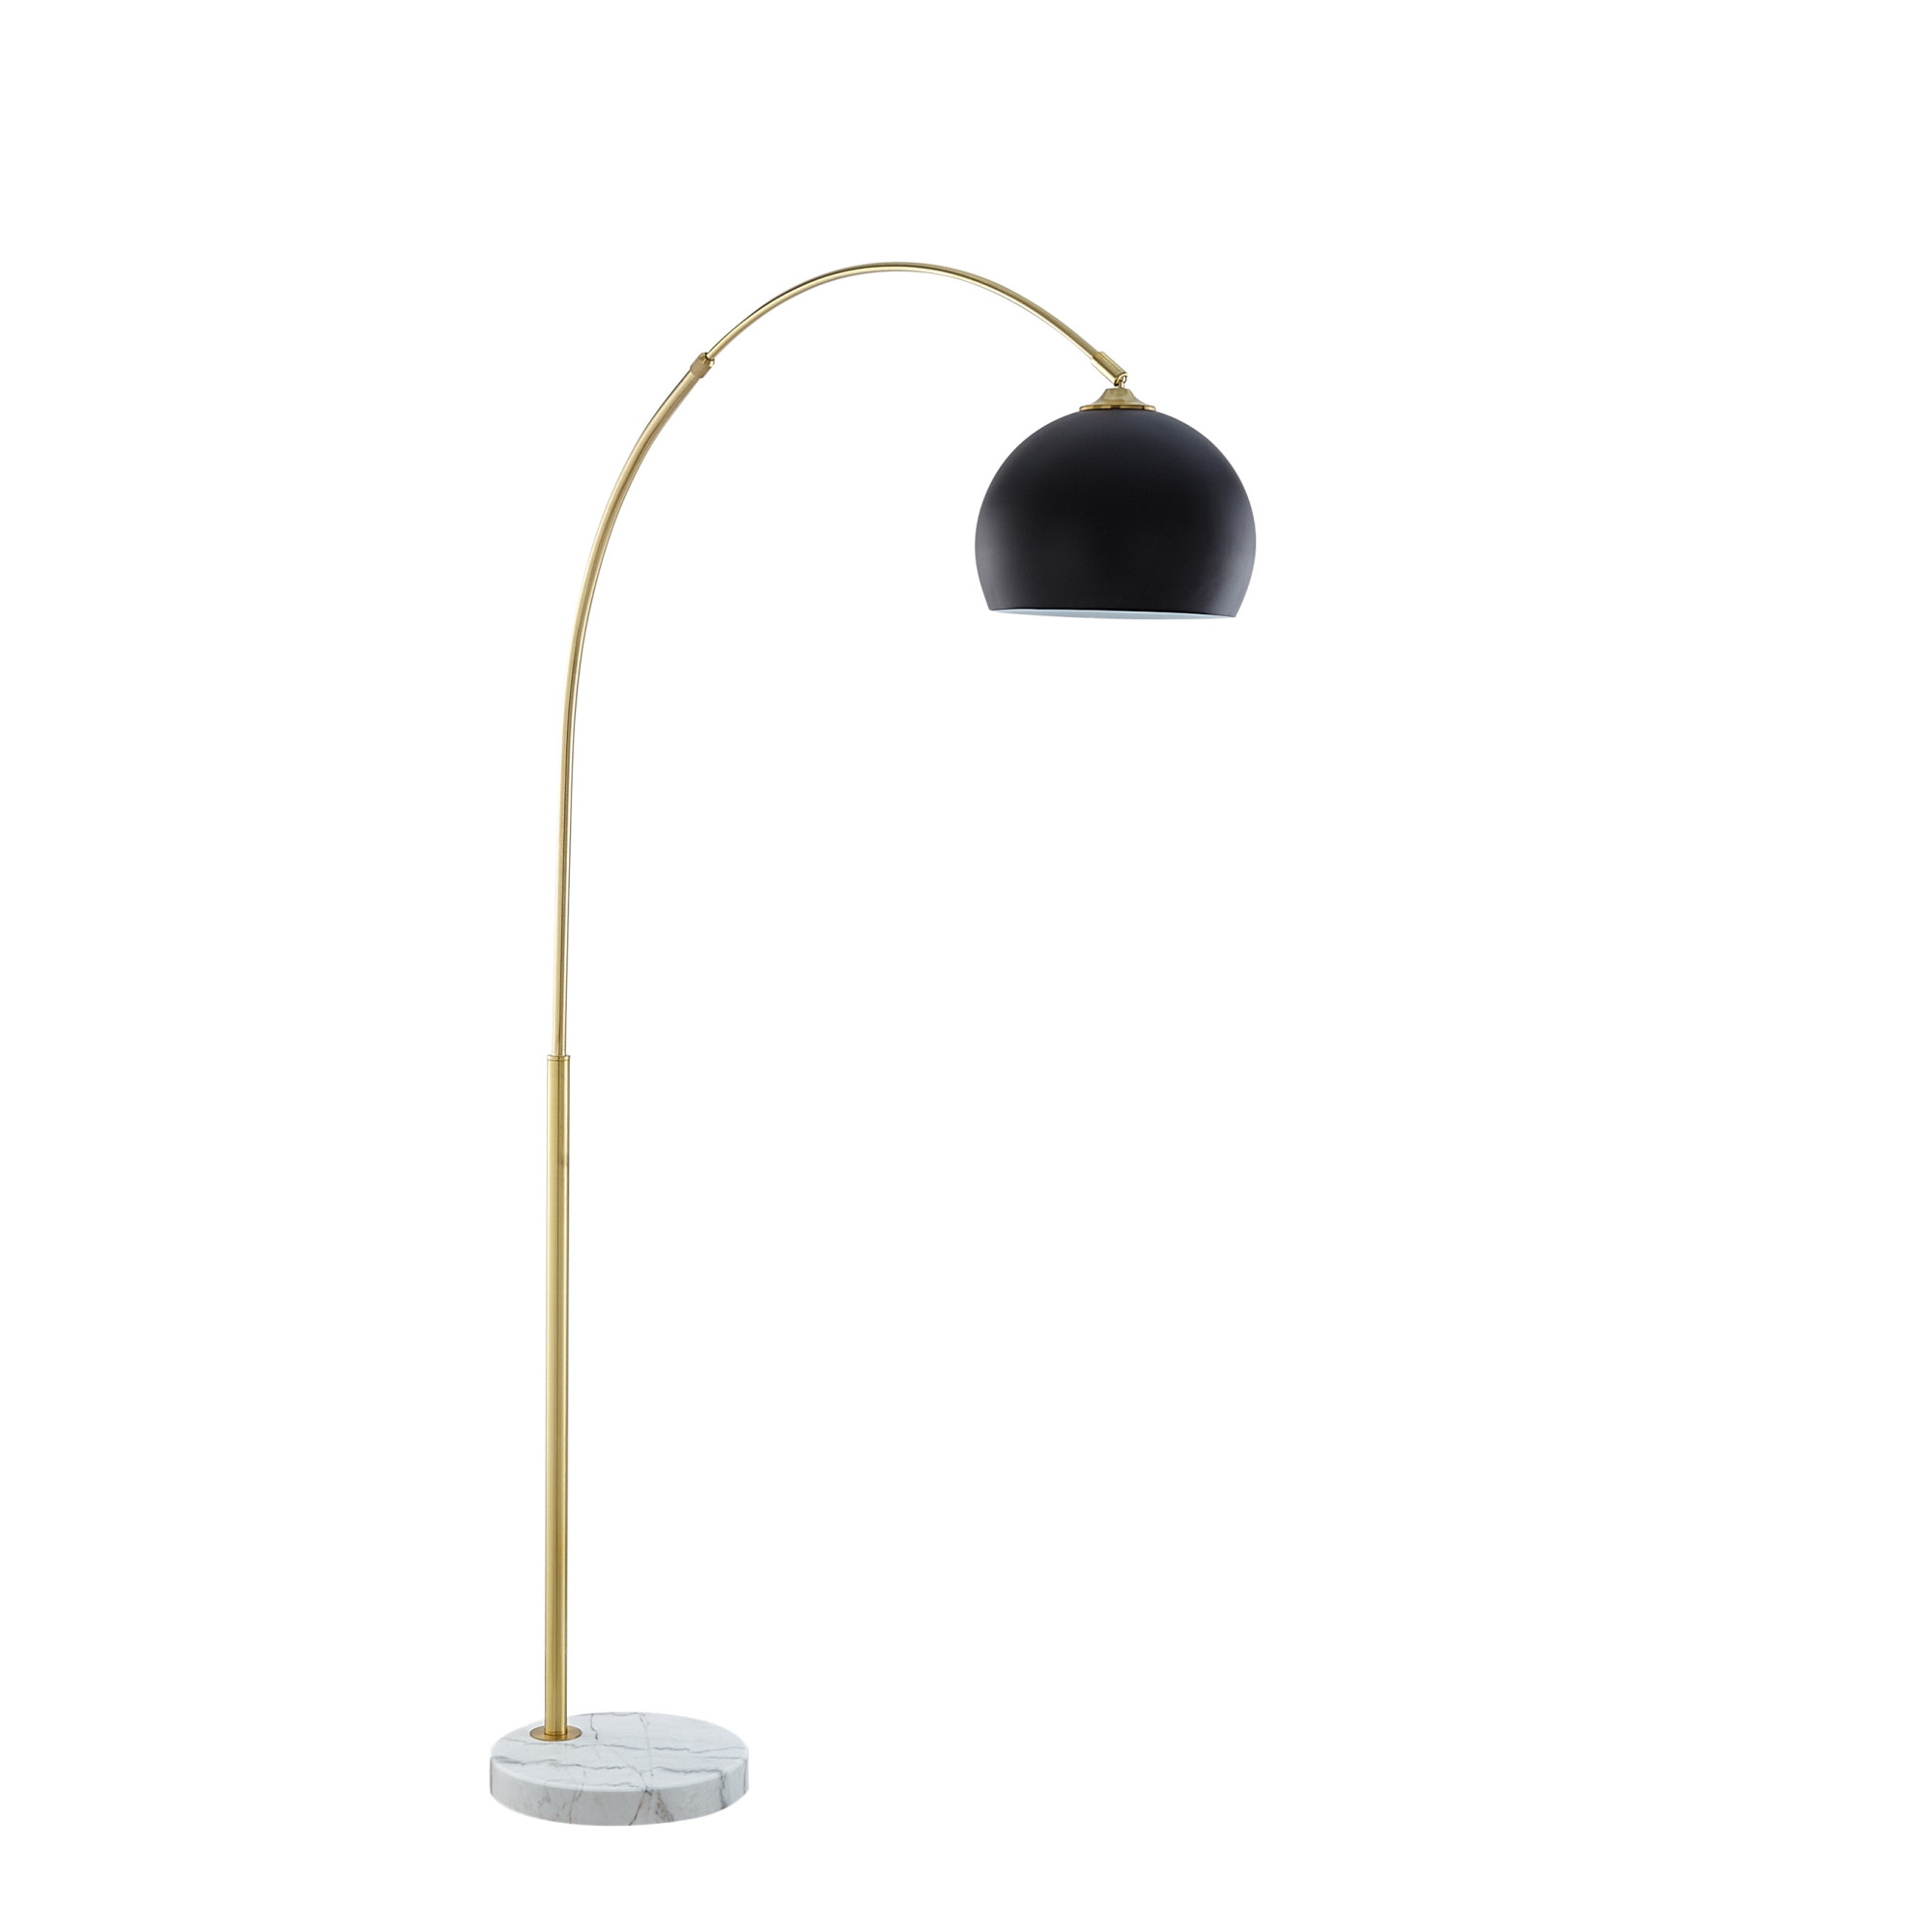 76" Brass Arched Floor Lamp With Black Dome Shade-530710-1